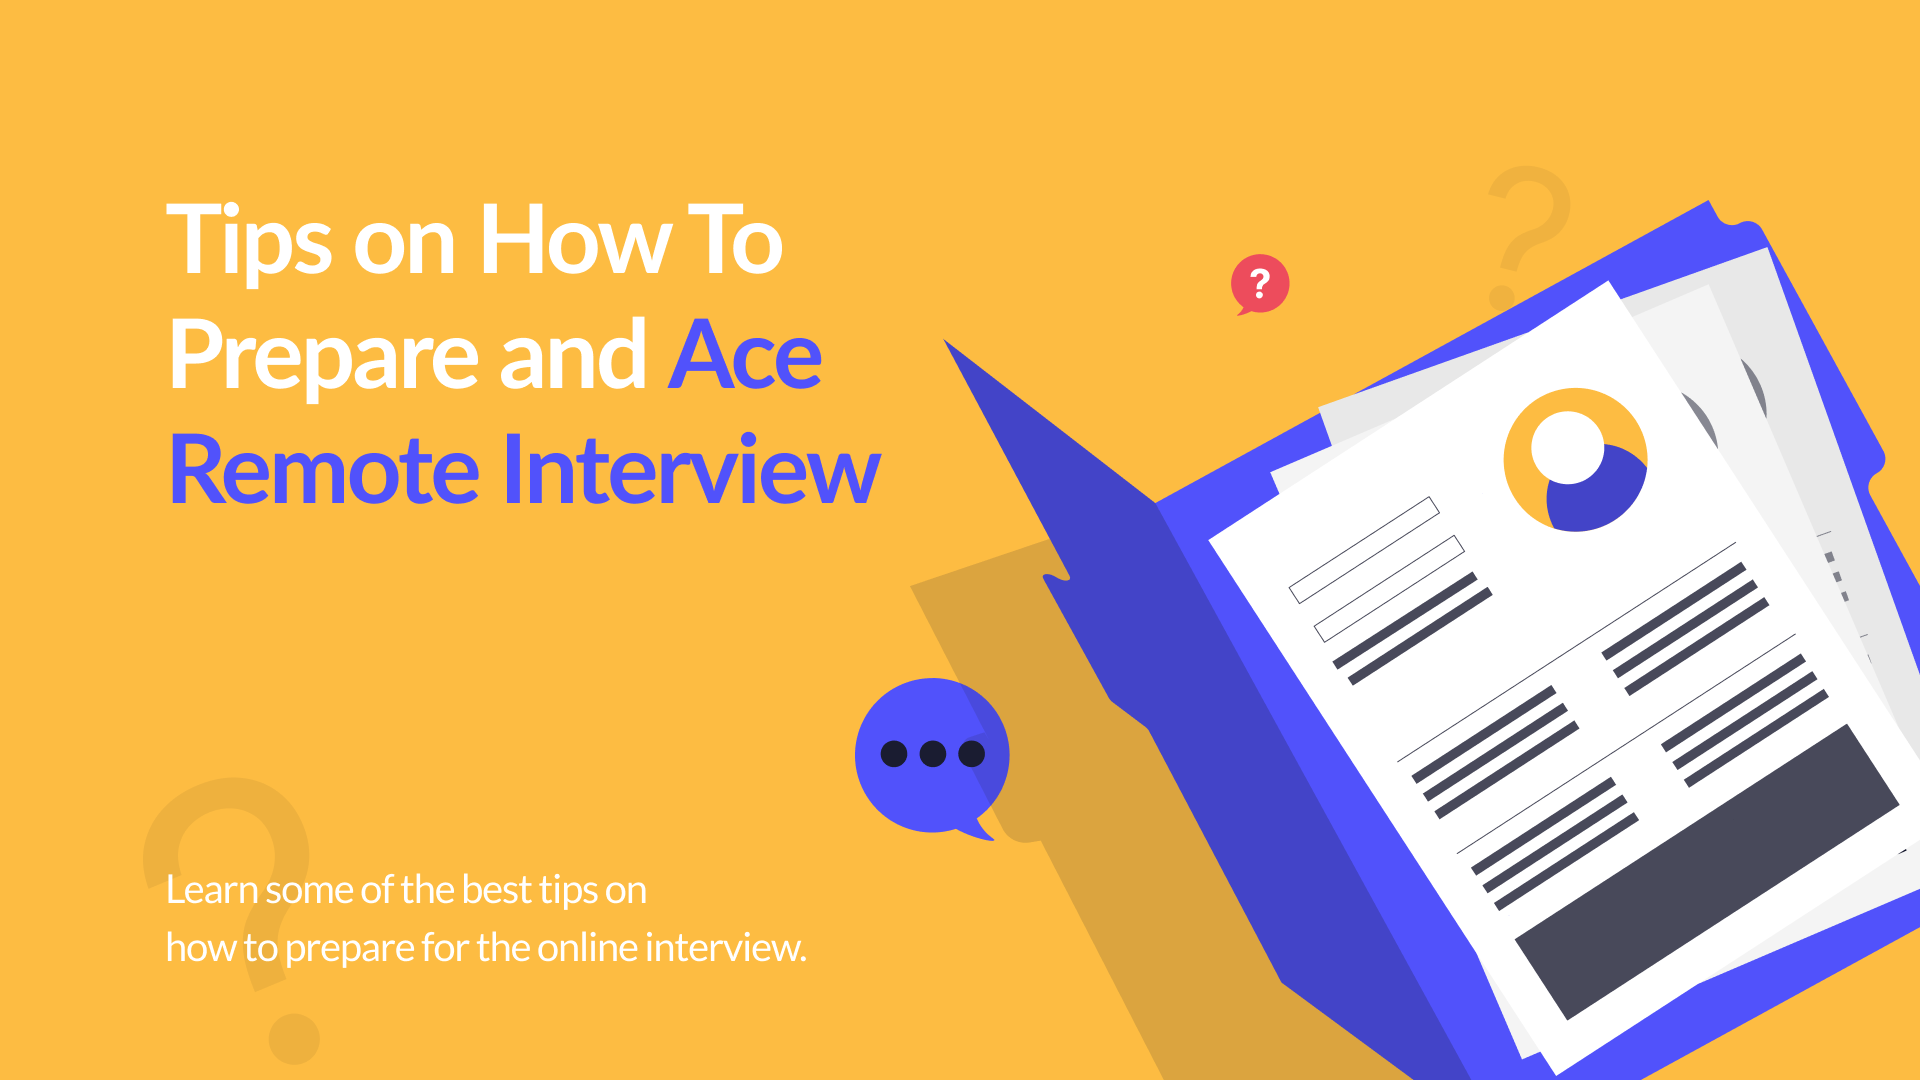 Tips On How to Ace Remote Interviews